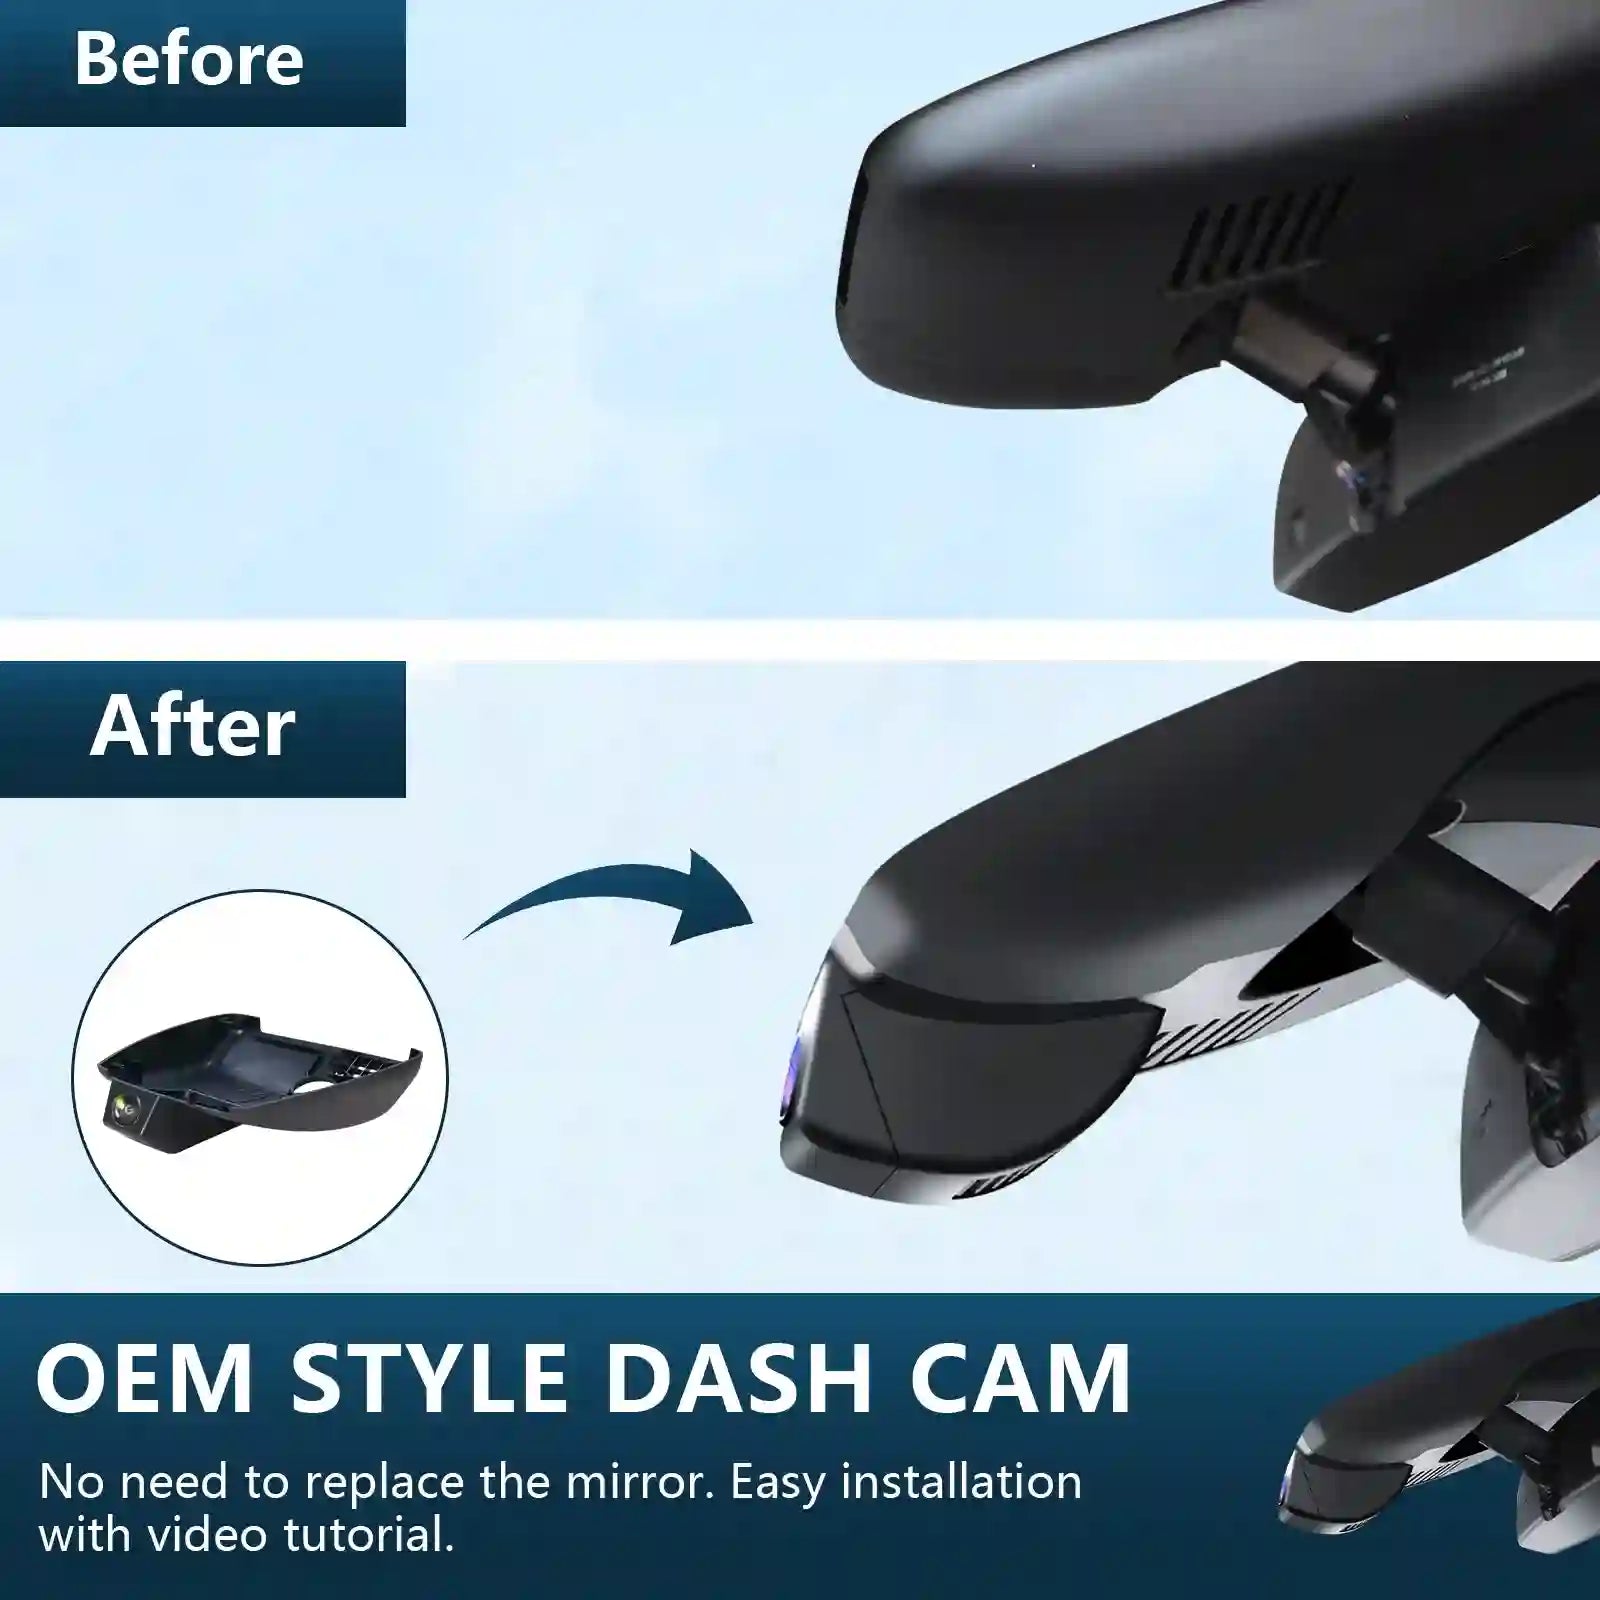 Mazda dash cam before and aftrer installation view 